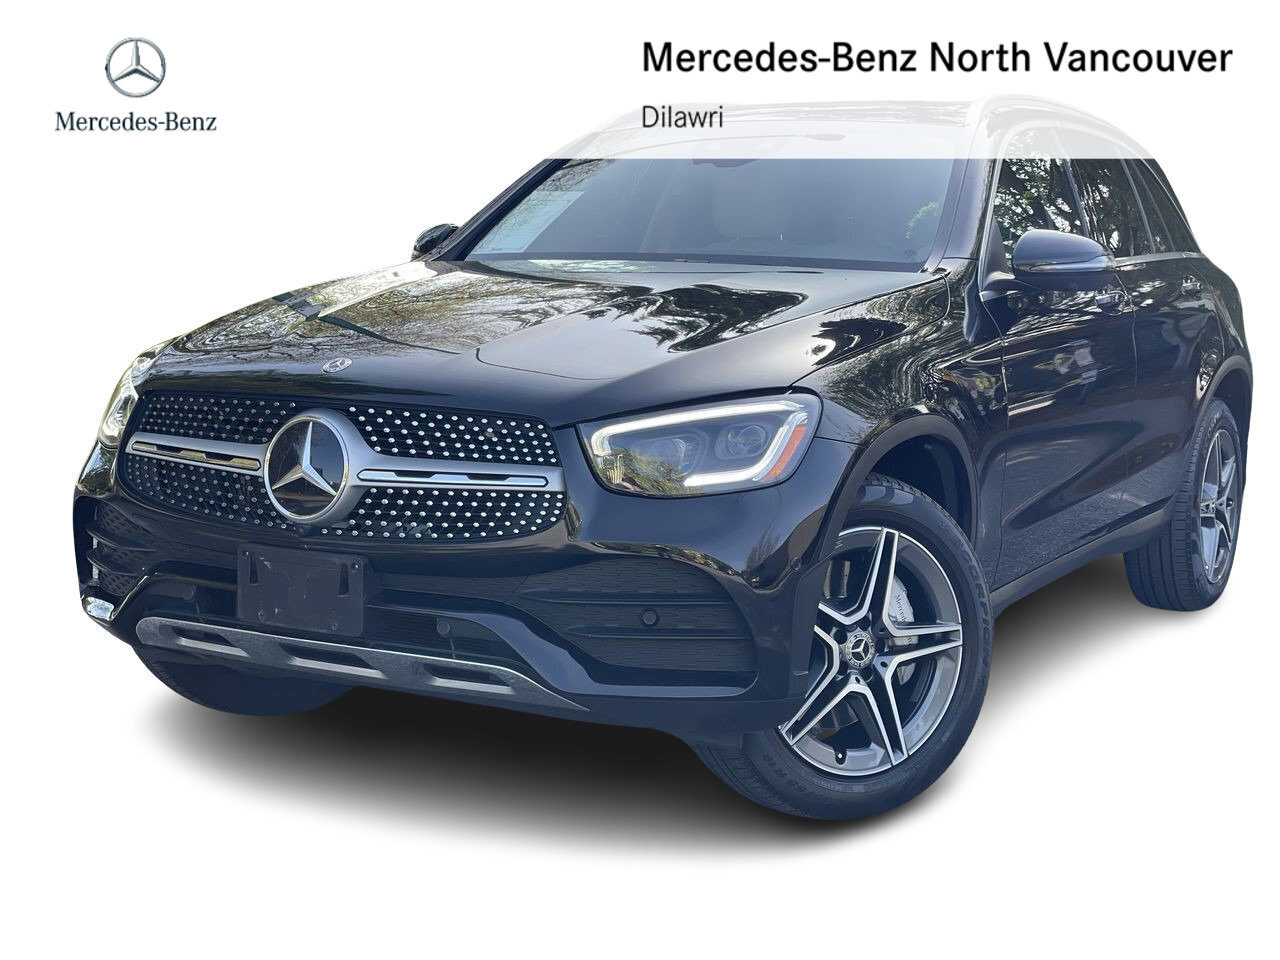 2020 Mercedes-Benz GLC300 4MATIC SUV Fully loaded every option. / Fully load